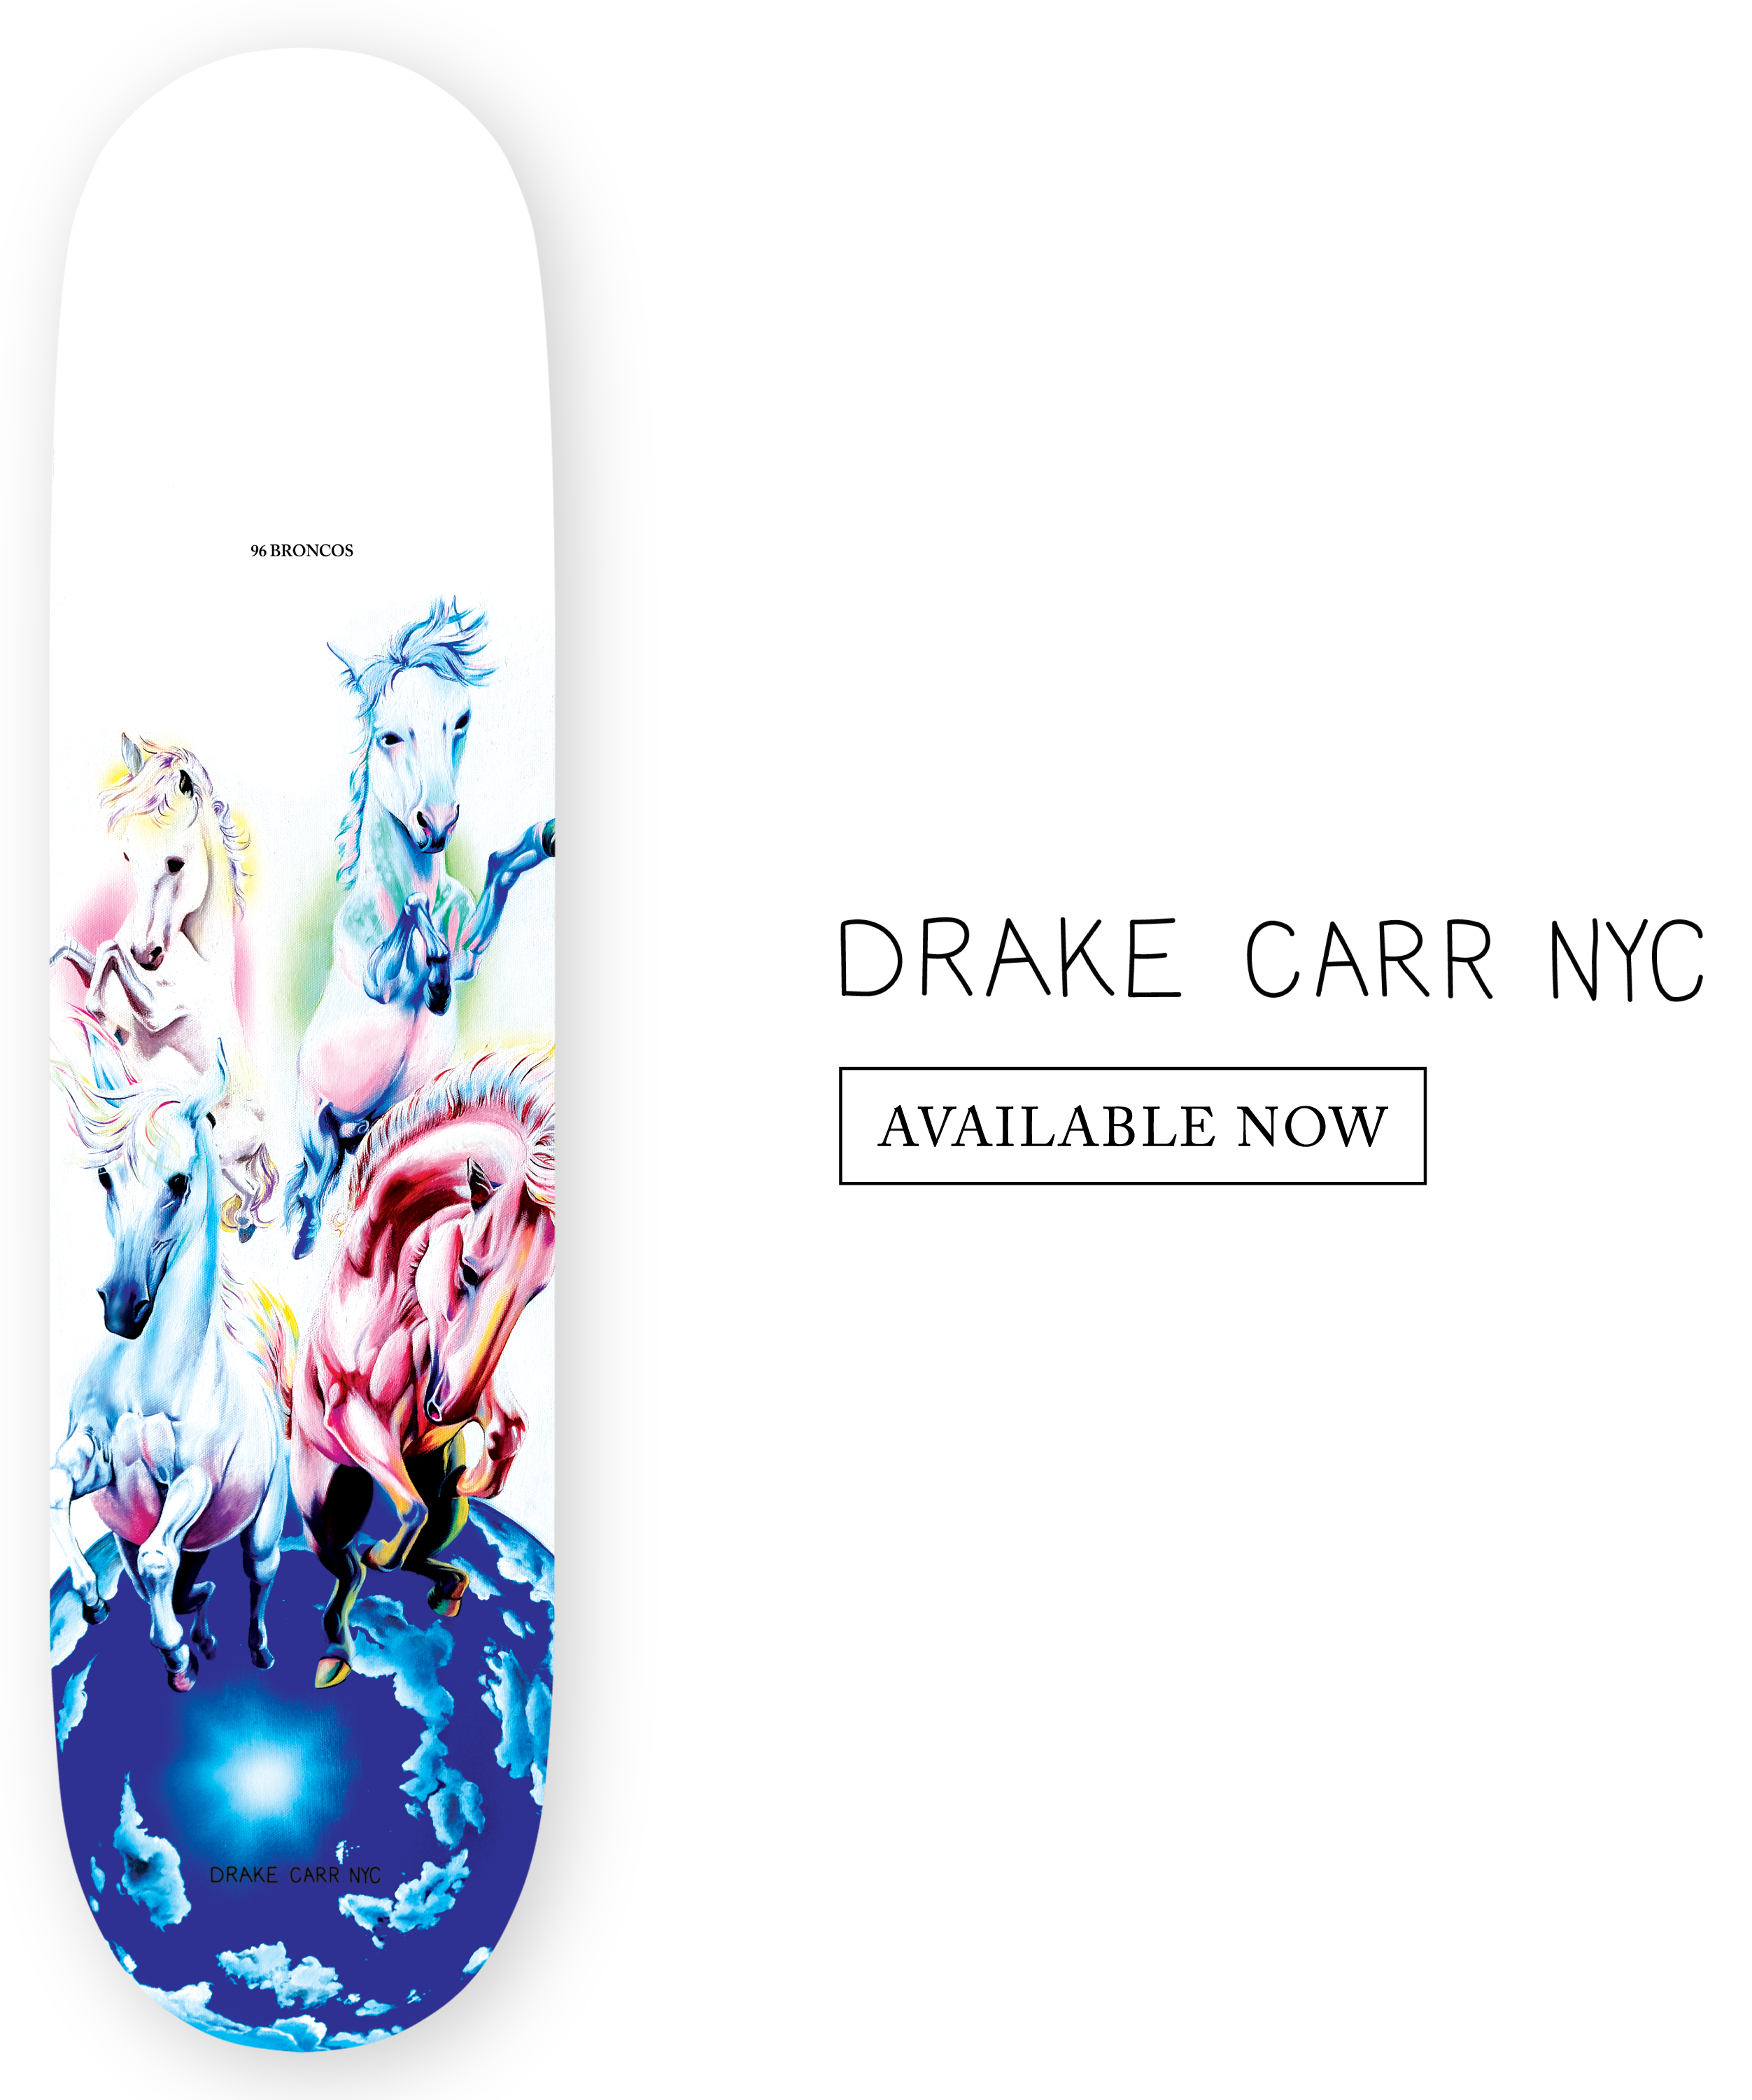 96 broncos skateboard graph designed by Drake Carr, colorful horses flying into outer space with beautiful planet in background